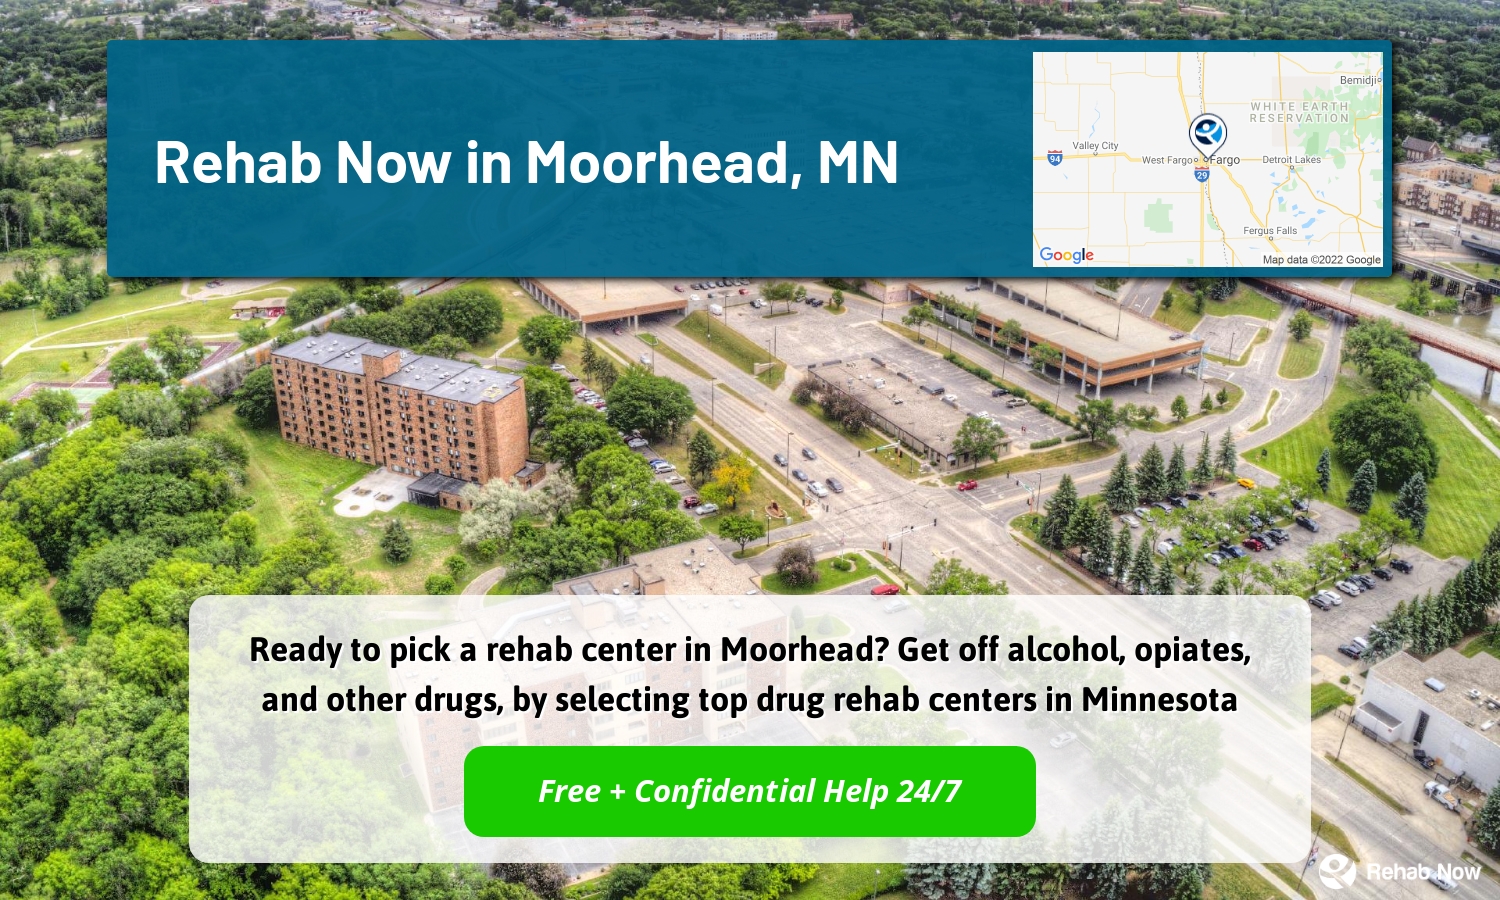 Ready to pick a rehab center in Moorhead? Get off alcohol, opiates, and other drugs, by selecting top drug rehab centers in Minnesota